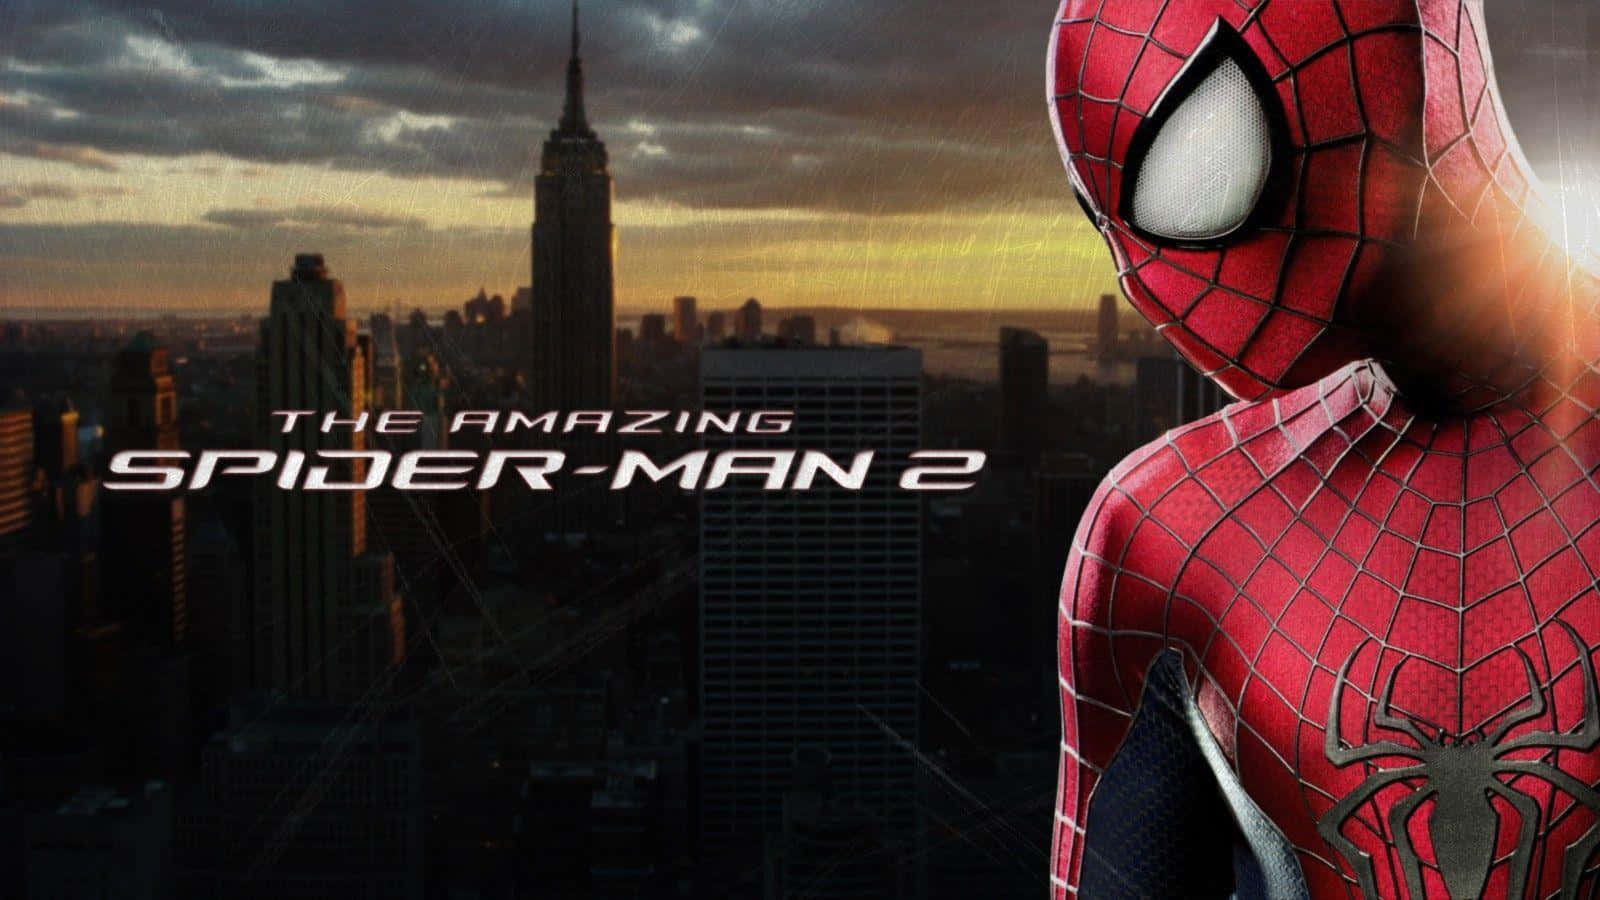 506371 1920x1536 the amazing spider man 2 full hd wallpapers new  Rare  Gallery HD Wallpapers